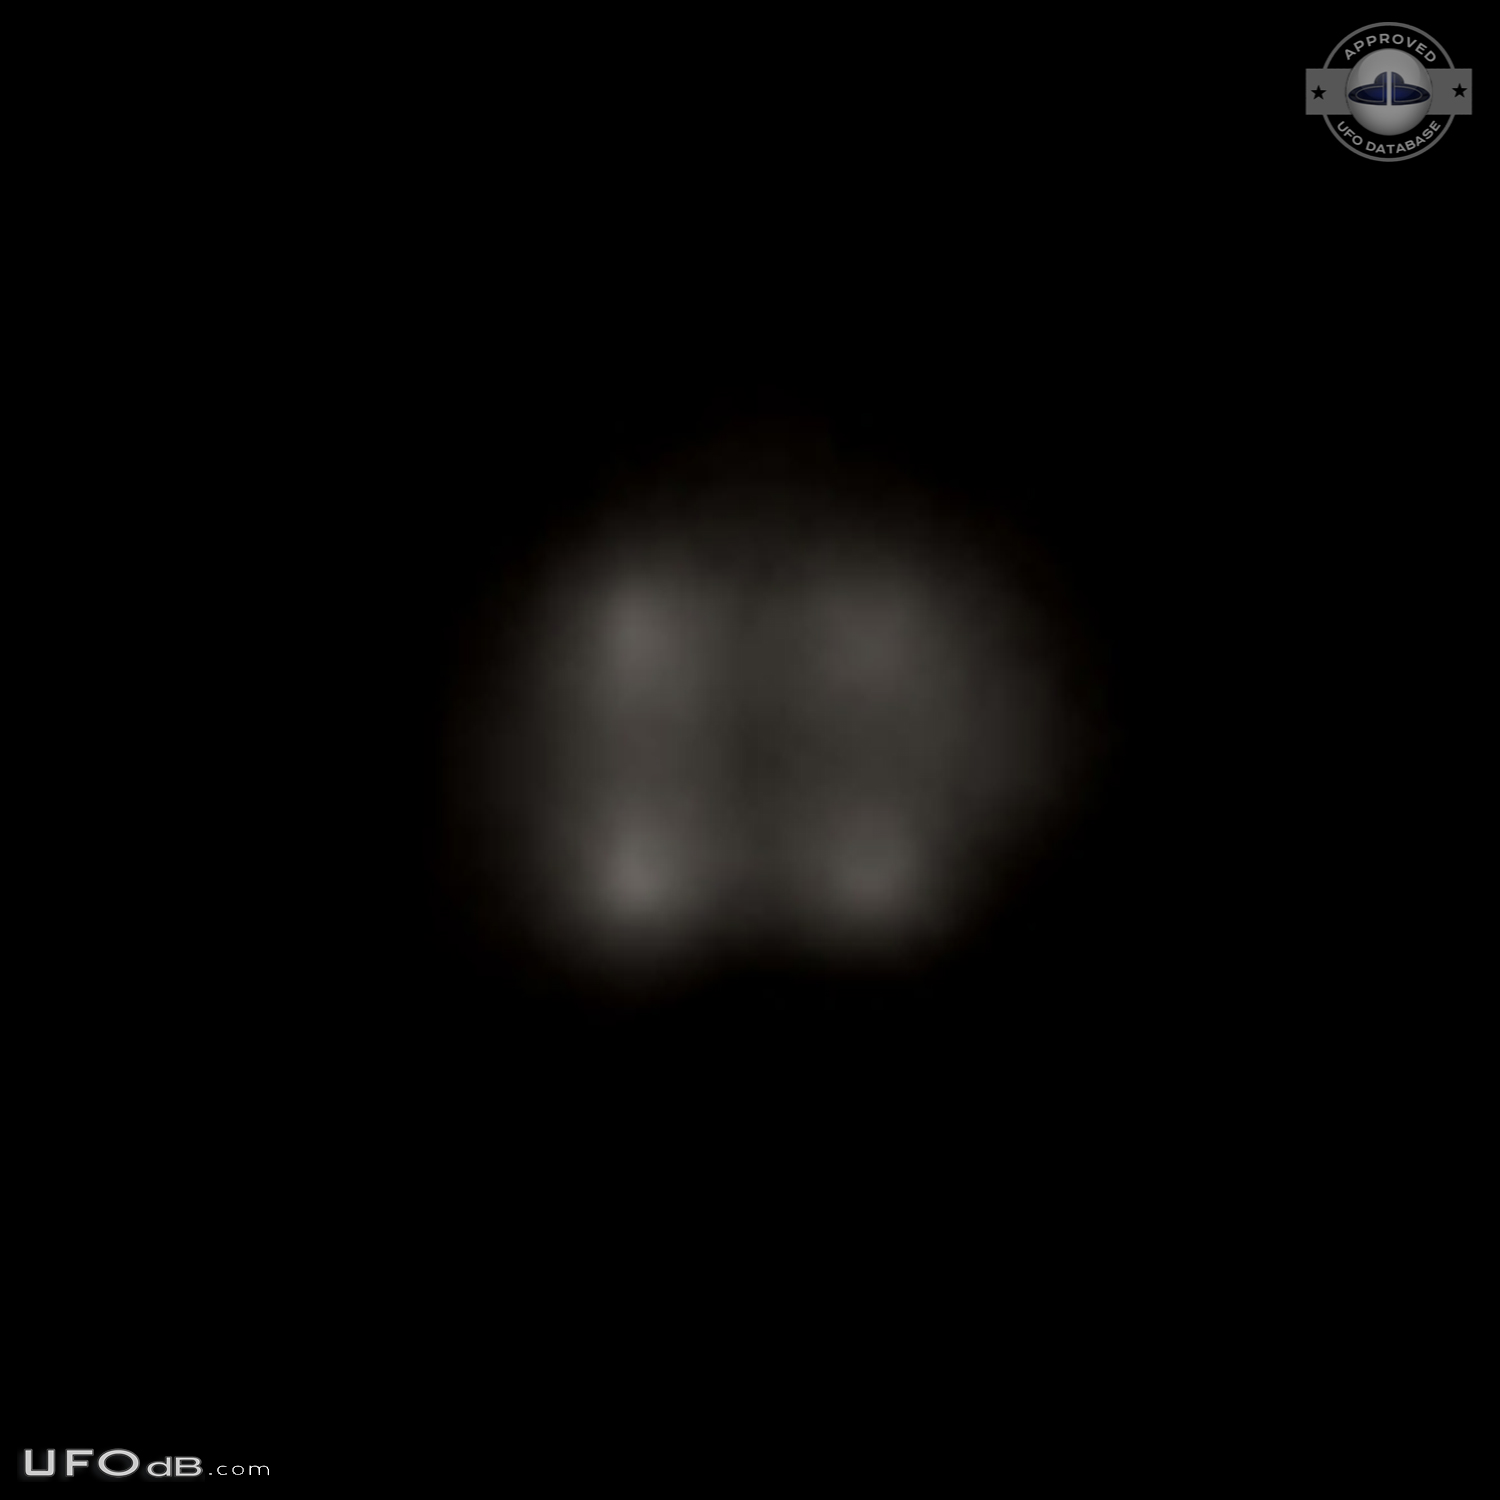 Square UFO with four thrusters fast shiny Hyderabad Telangana India UFO Picture #656-4